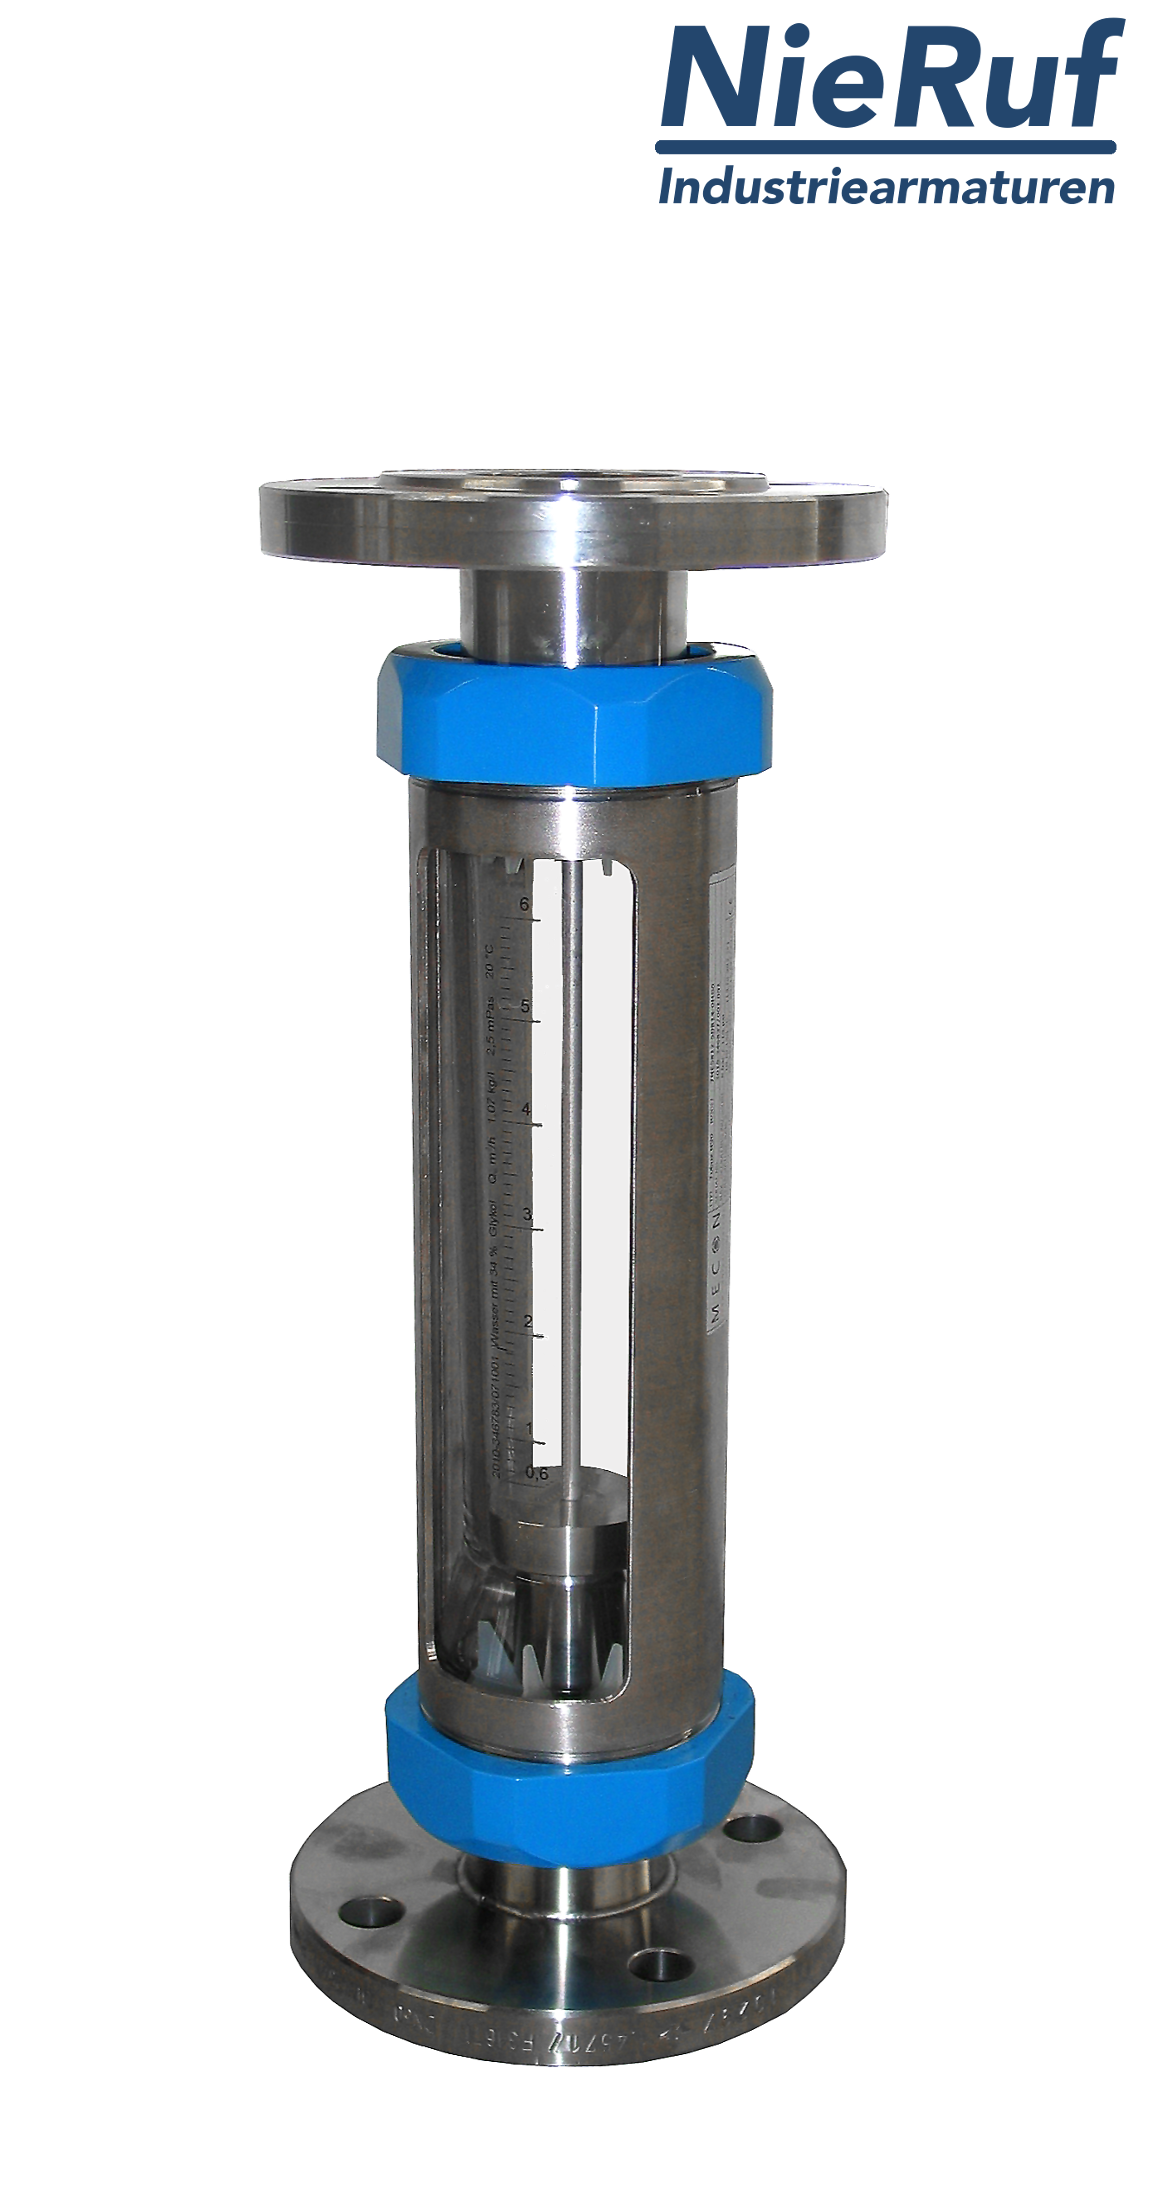 Variable area flowmeter stainless steel + borosilicate flange DN50 200.0 - 2000 l/h water FKM